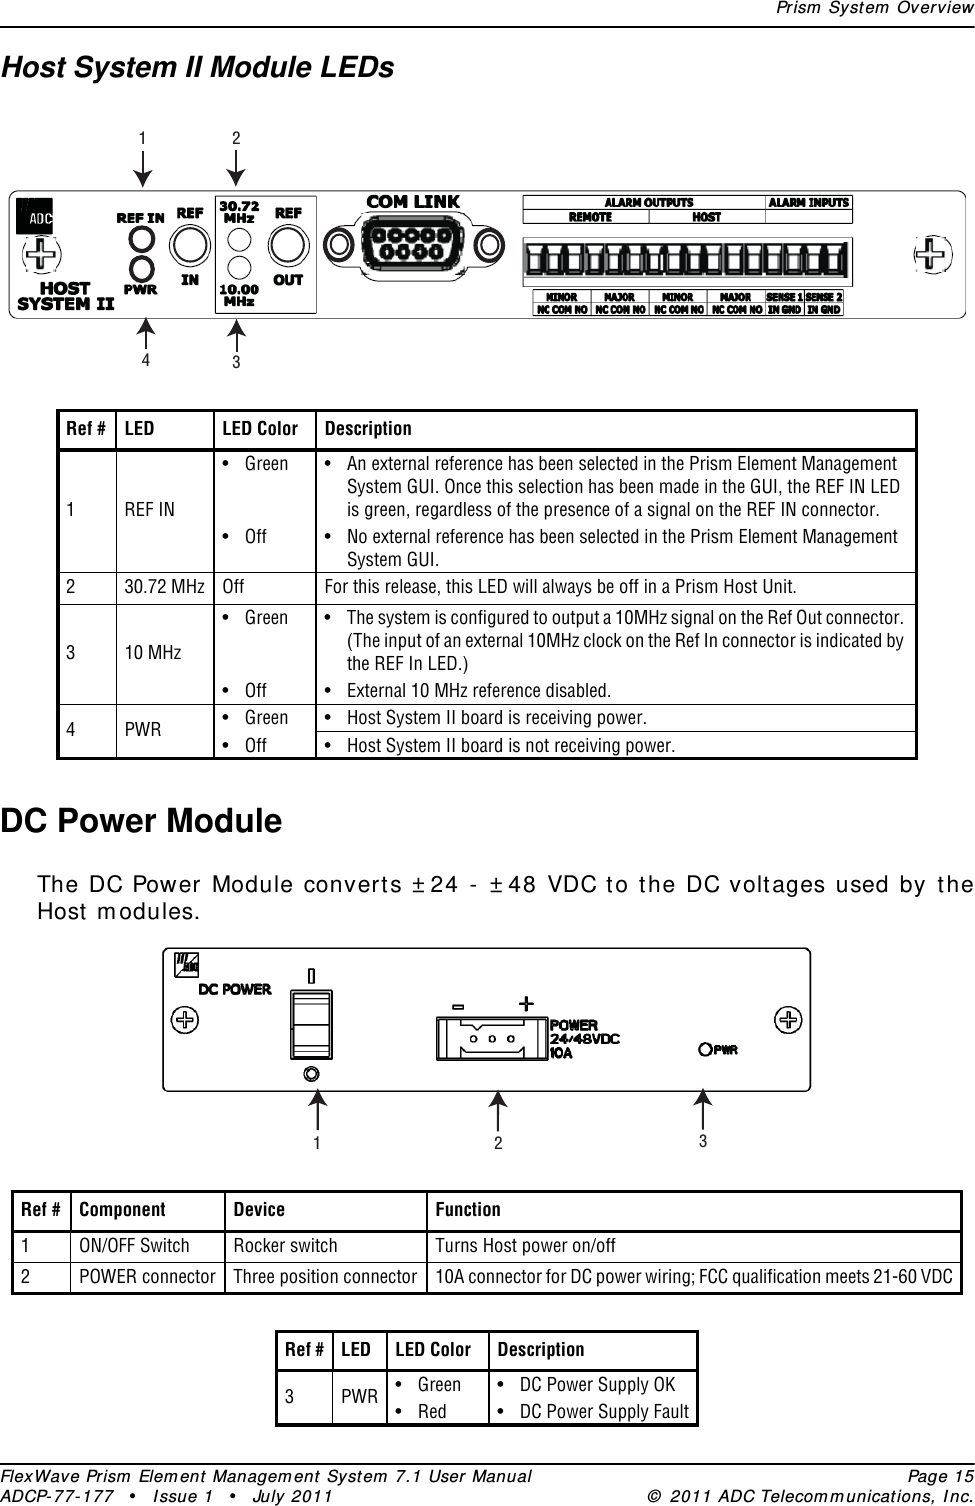 Prism System OverviewFlexWave Prism Element Management System 7.1 User Manual Page 15ADCP-77-177 • Issue 1 • July 2011 © 2011 ADC Telecommunications, Inc.Host System II Module LEDsDC Power ModuleThe DC Power Module converts ±24 - ±48 VDC to the DC voltages used by the Host modules.Ref # LED LED Color Description1REF IN• Green • An external reference has been selected in the Prism Element Management System GUI. Once this selection has been made in the GUI, the REF IN LED is green, regardless of the presence of a signal on the REF IN connector.• Off • No external reference has been selected in the Prism Element Management System GUI.230.72 MHz Off For this release, this LED will always be off in a Prism Host Unit.310 MHz• Green • The system is configured to output a 10MHz signal on the Ref Out connector. (The input of an external 10MHz clock on the Ref In connector is indicated by the REF In LED.)• Off • External 10 MHz reference disabled.4PWR • Green • Host System II board is receiving power.• Off • Host System II board is not receiving power.Ref # Component Device Function1ON/OFF Switch Rocker switch Turns Host power on/off2POWER connector Three position connector 10A connector for DC power wiring; FCC qualification meets 21-60 VDCRef # LED LED Color Description3PWR • Green • DC Power Supply OK• Red • DC Power Supply Fault1234123